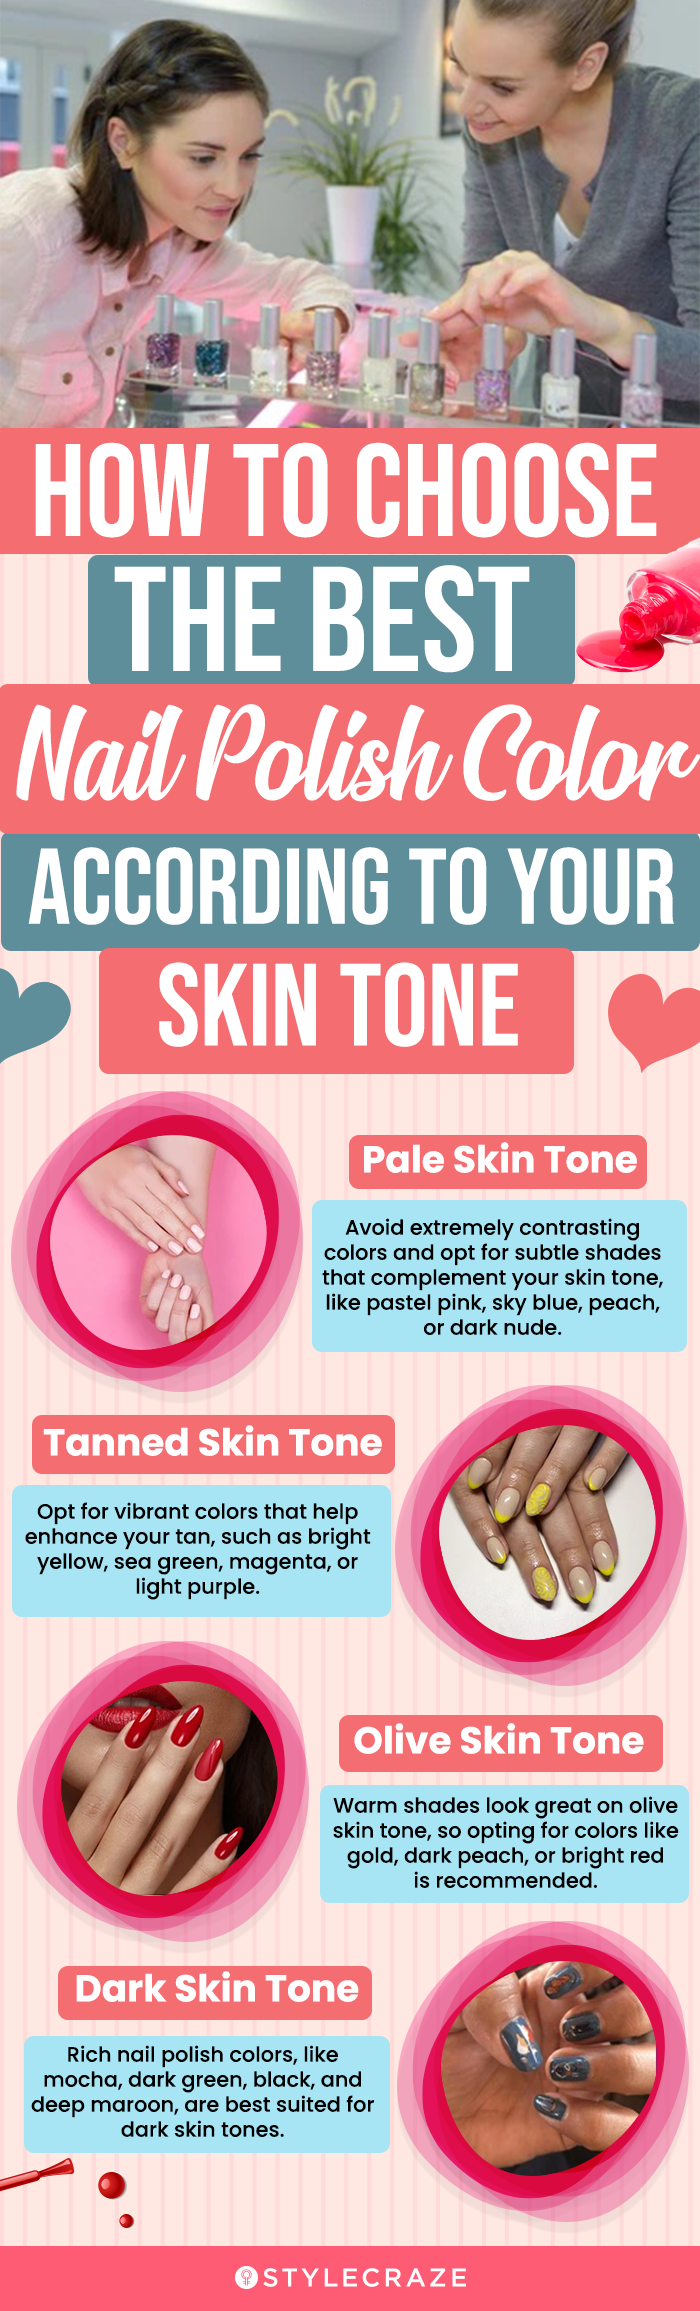 how to choose the best nail polish color according to your skin tone (infographic)